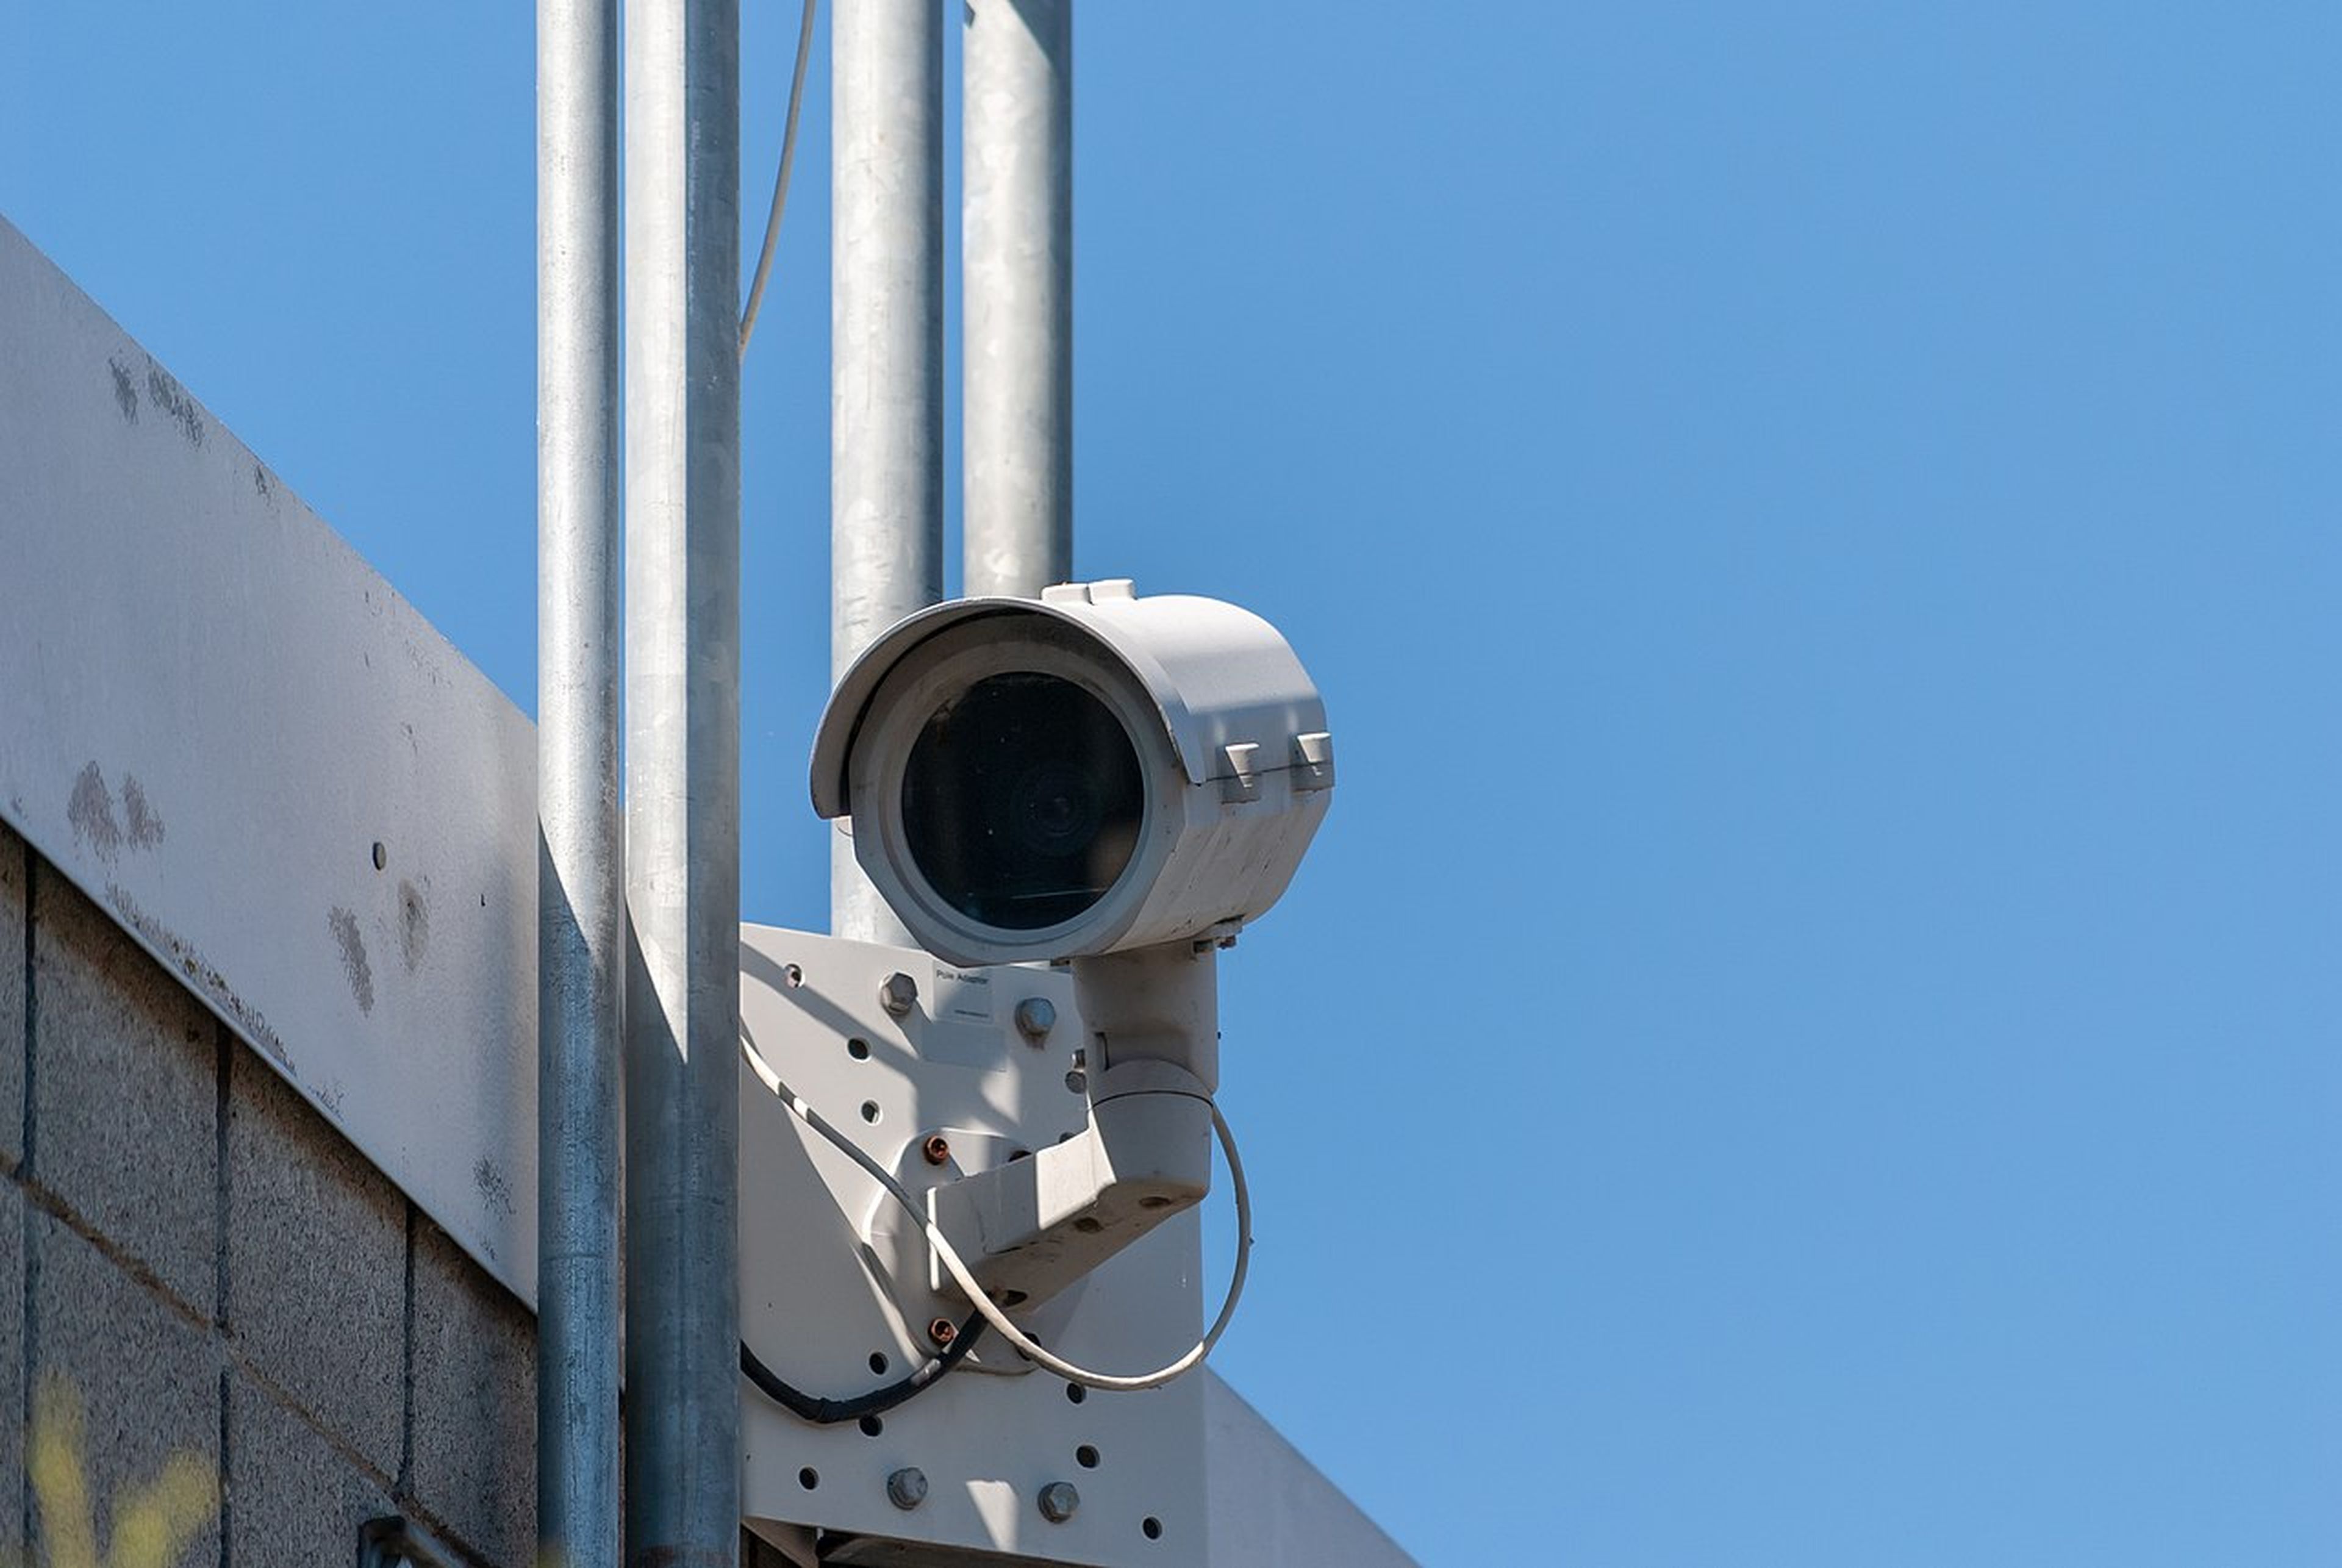 A security camera located on the Mount Vernon river walk in Washington. SC Media is not suggesting that this particular camera uses ThroughTek&#8217;s Kalay protocol. (© Cody Logan / Wikimedia Commons / &#8220;Security camera, September 2018&#8221;)